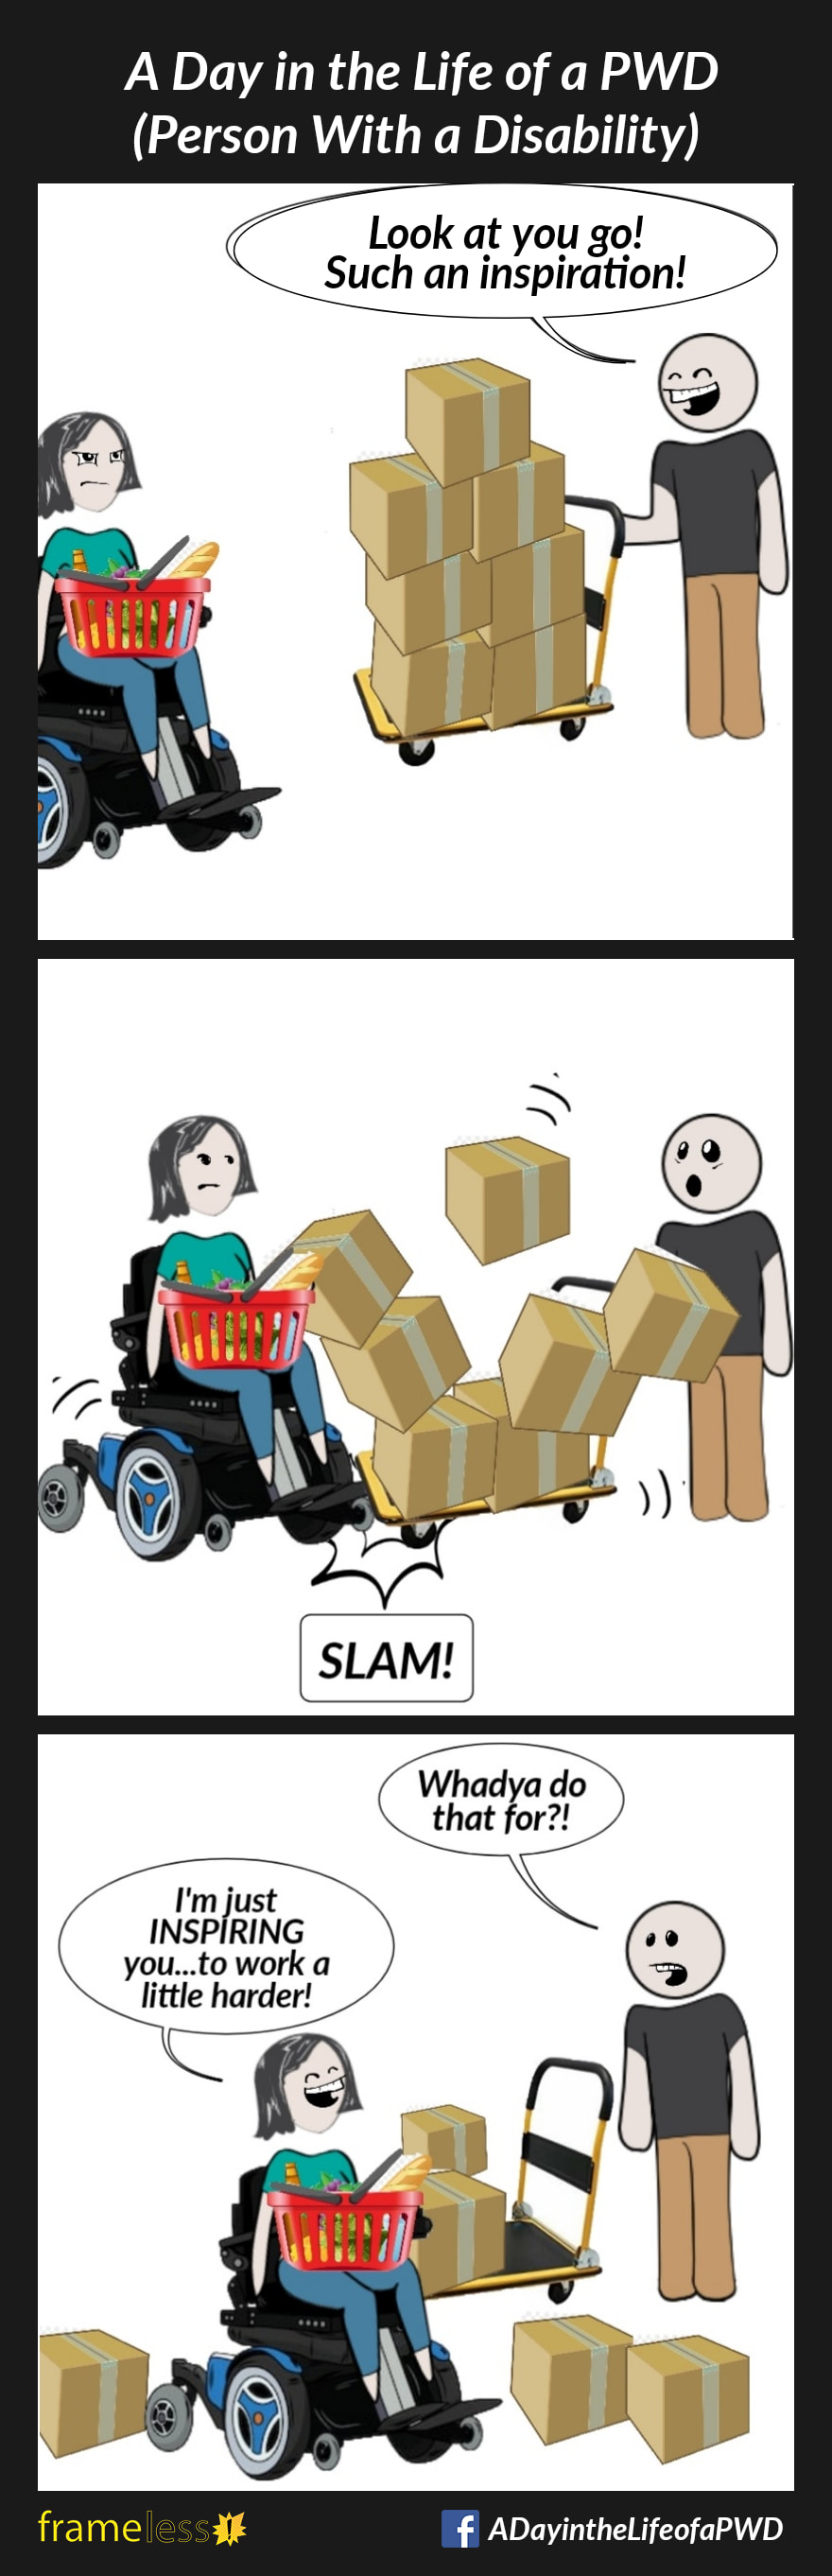 COMIC STRIP 
A Day in the Life of a PWD (Person With a Disability) 

Frame 1:
A woman in a power wheelchair is in a grocery store with a basket on her lap.
A clerk pushing a cart full of boxes notices her.
CLERK: Look at you go! Such an inspiration!

Frame 2:
The woman slams into the cart, knocking the boxes over.

Frame 3:
CLERK: Whadya do that for?!
WOMAN: I'm just INSPIRING you
.....to work a little harder!